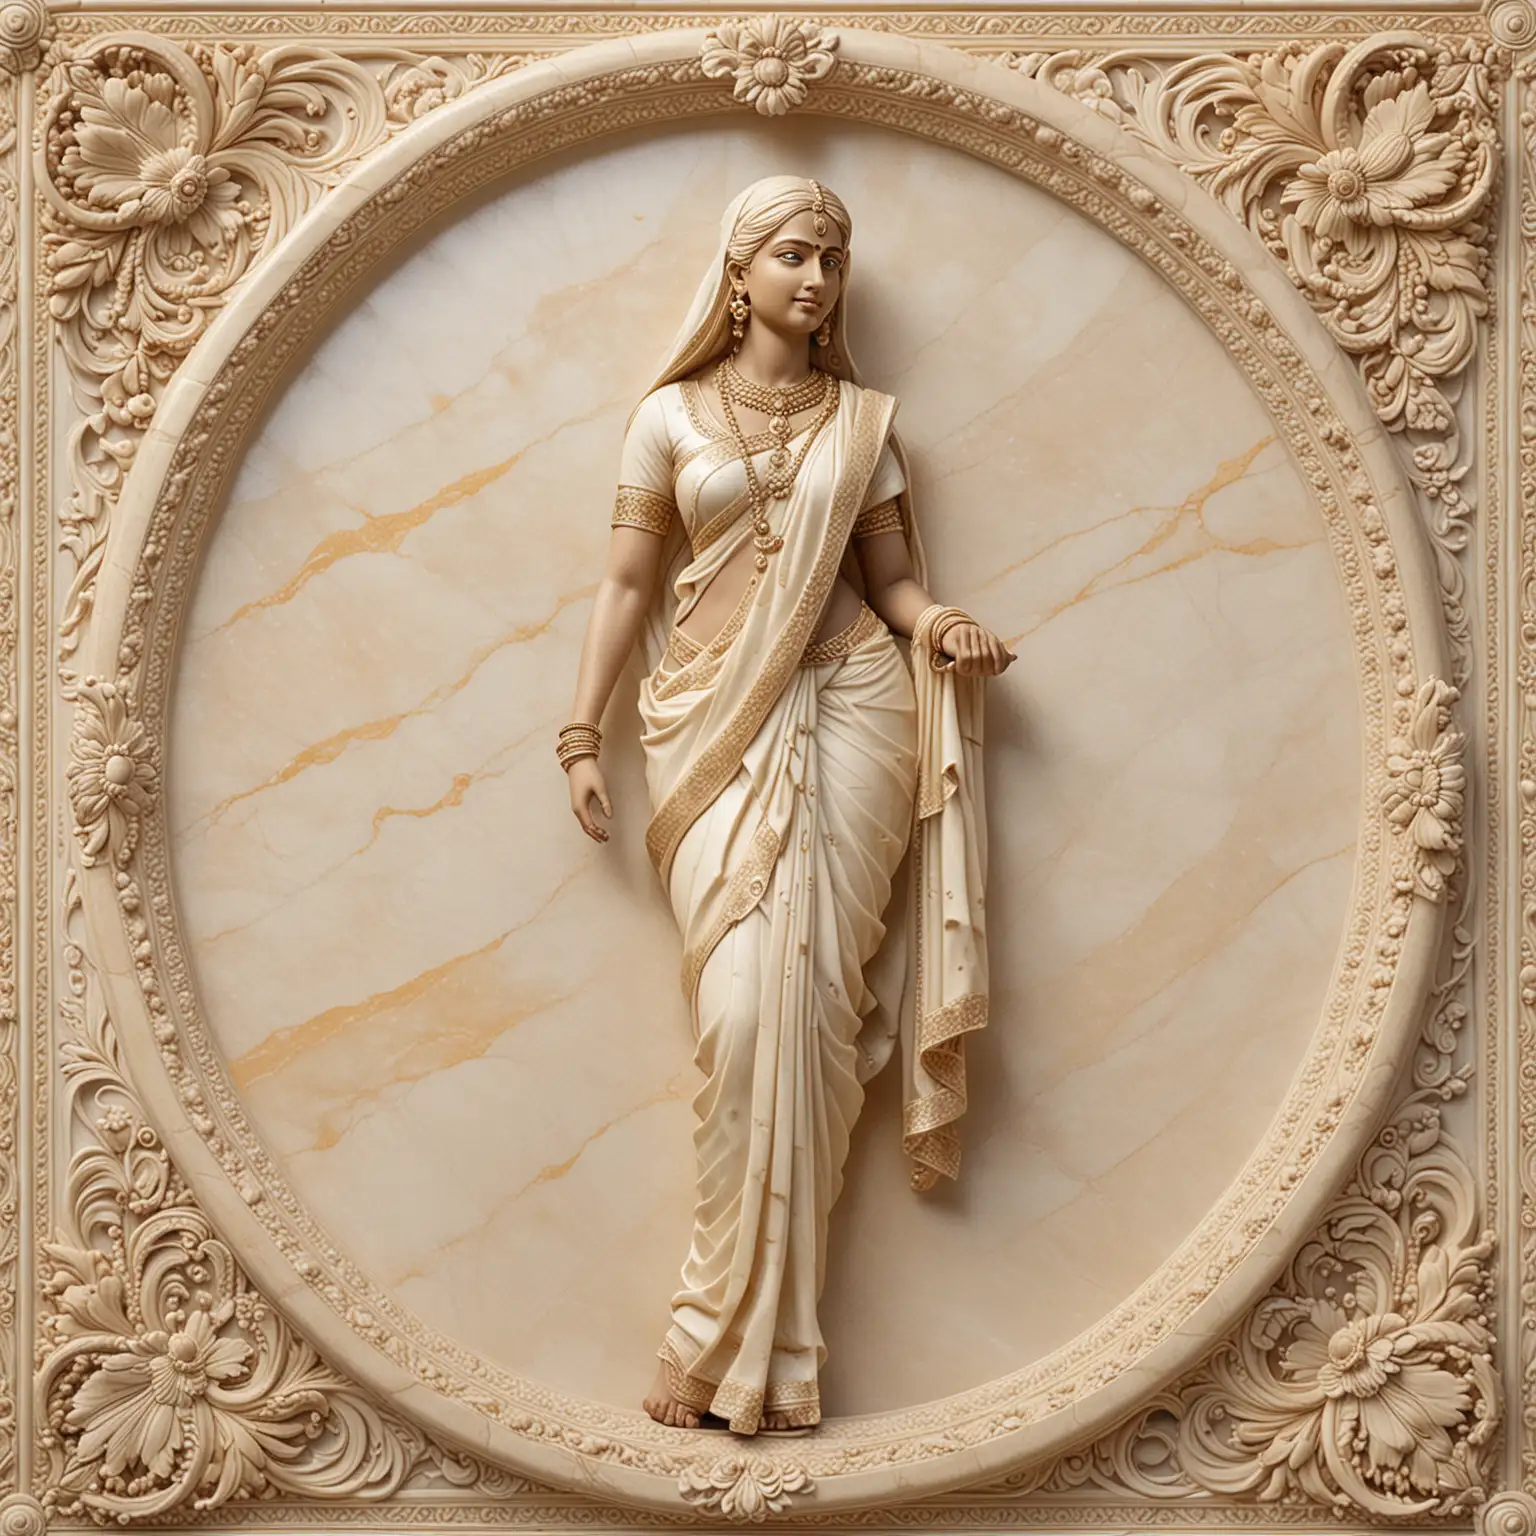 seamless 3d highly detailed and  carved cream marble panel with cream marble ornate frame in the theme of a full length cream marble indian woman in a sari



 





